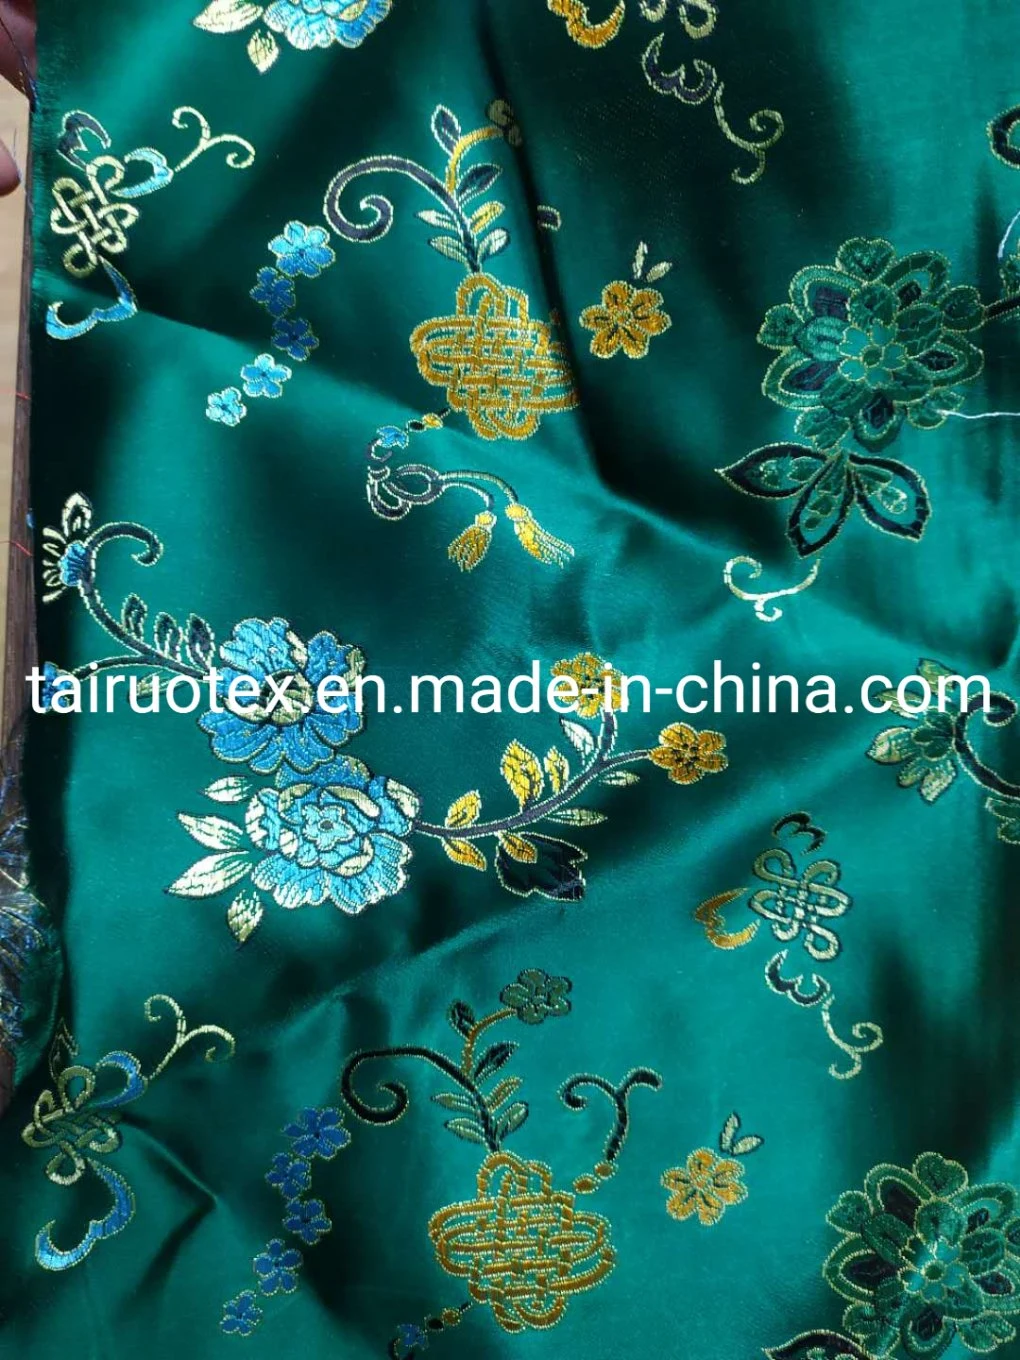 Polyester Jacquard Fabric for Garment Fabric and Bag Lining Fabric